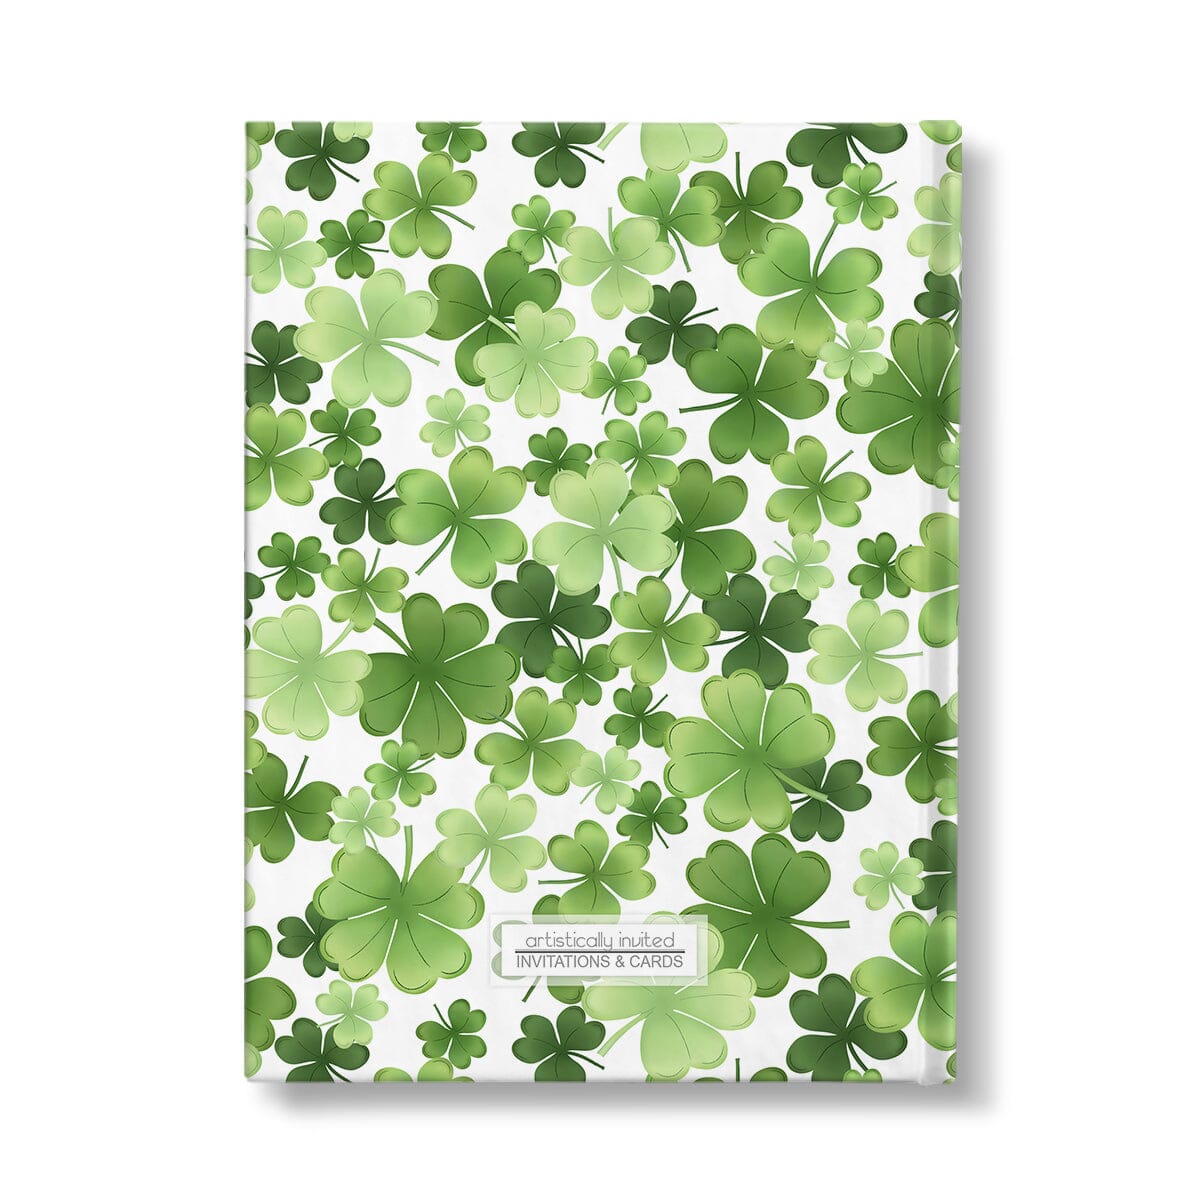 Personalized Shamrocks and 4-Leaf Clovers Journal at Artistically Invited. Back side of journal.